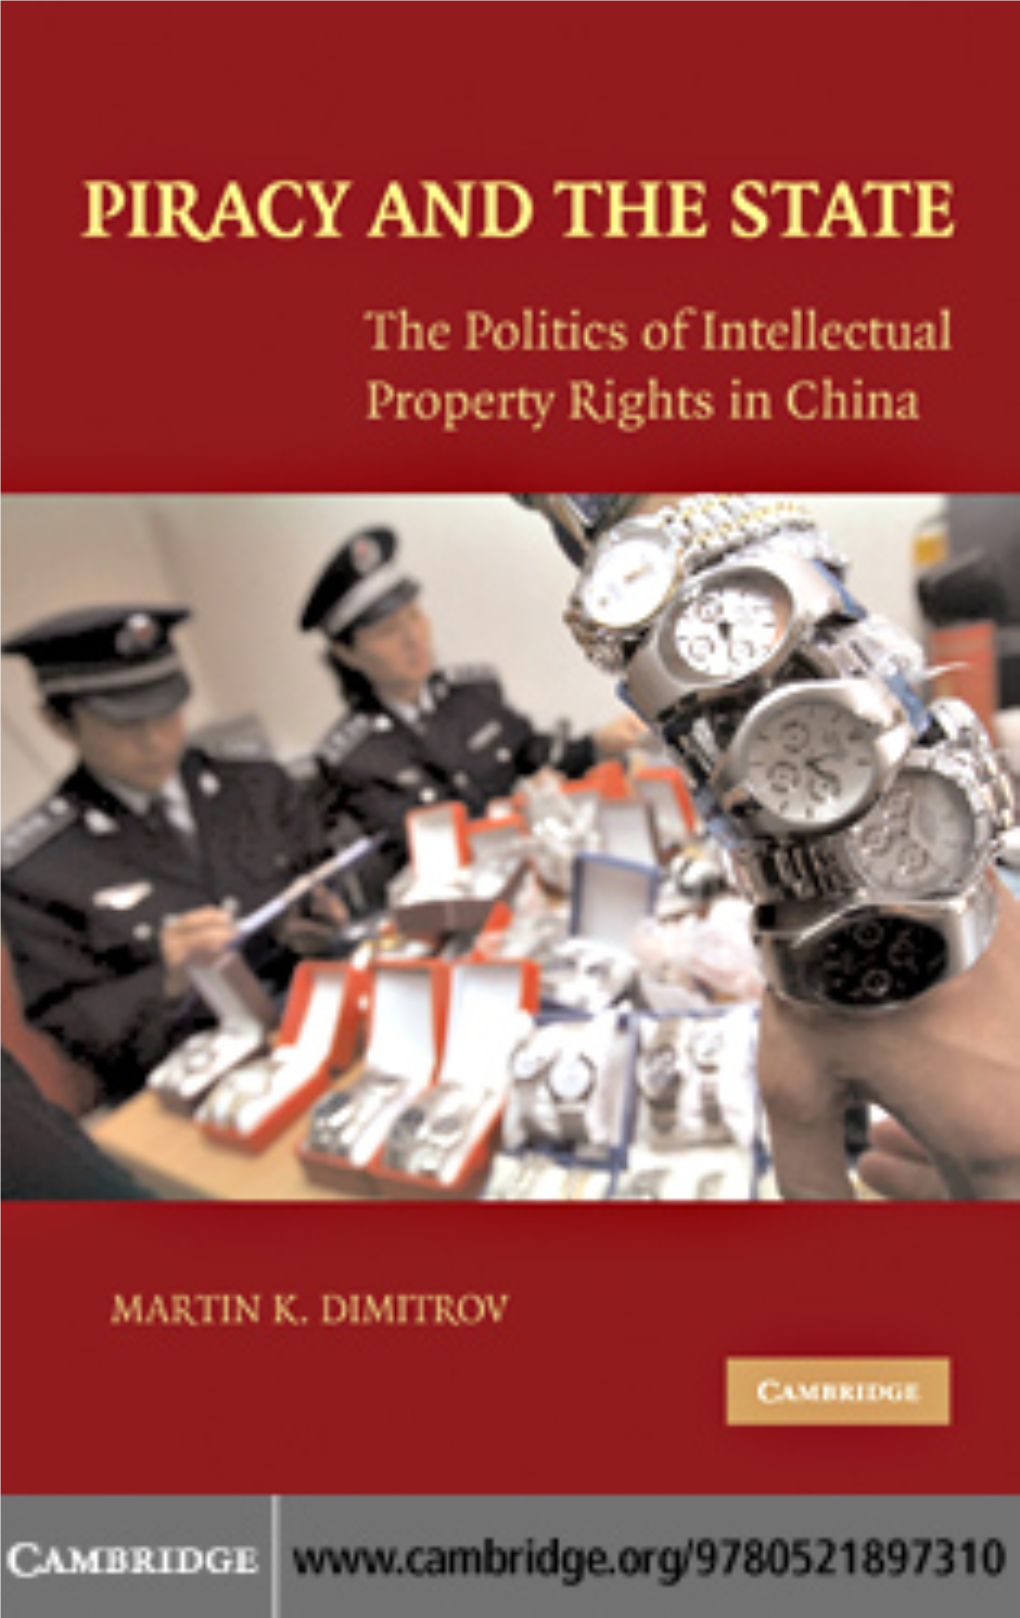 The Politics of Intellectual Property Rights in China